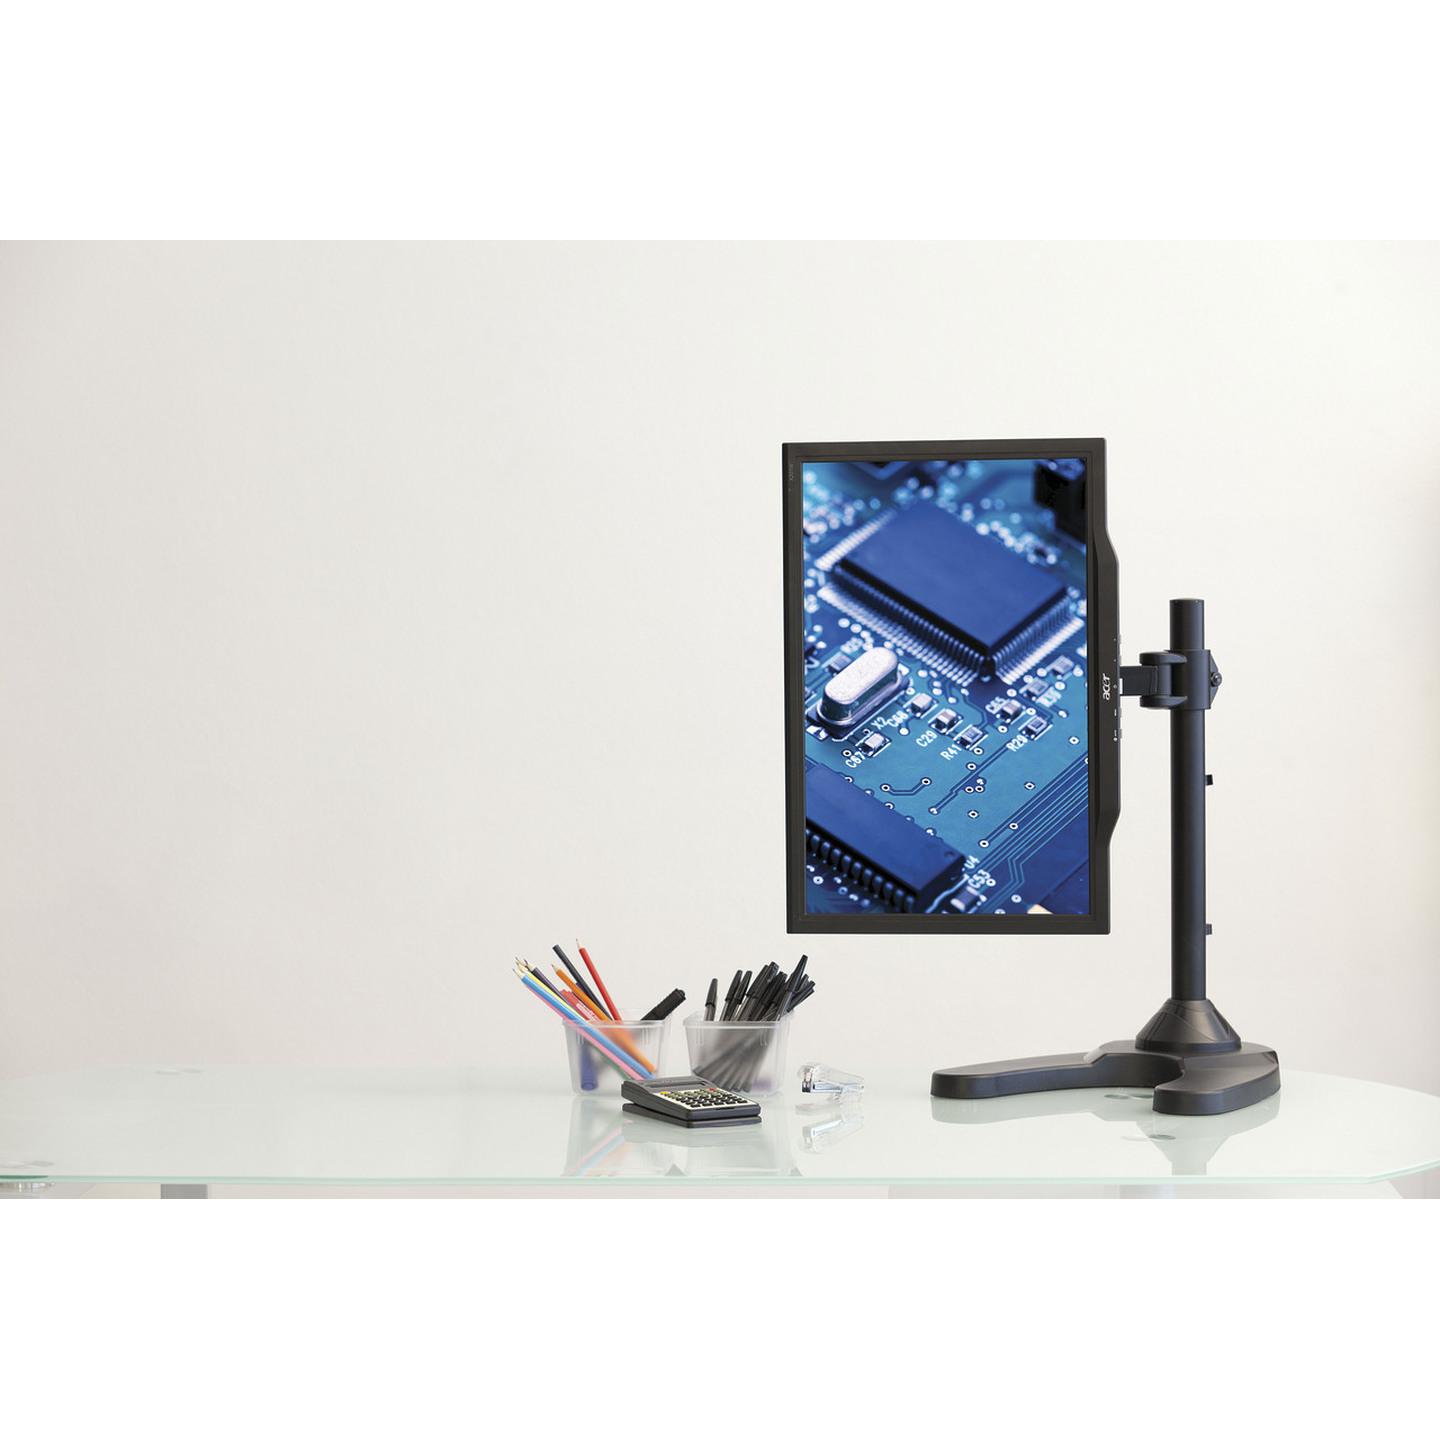 BRKT LCD MONITOR STAND SINGLE BLK